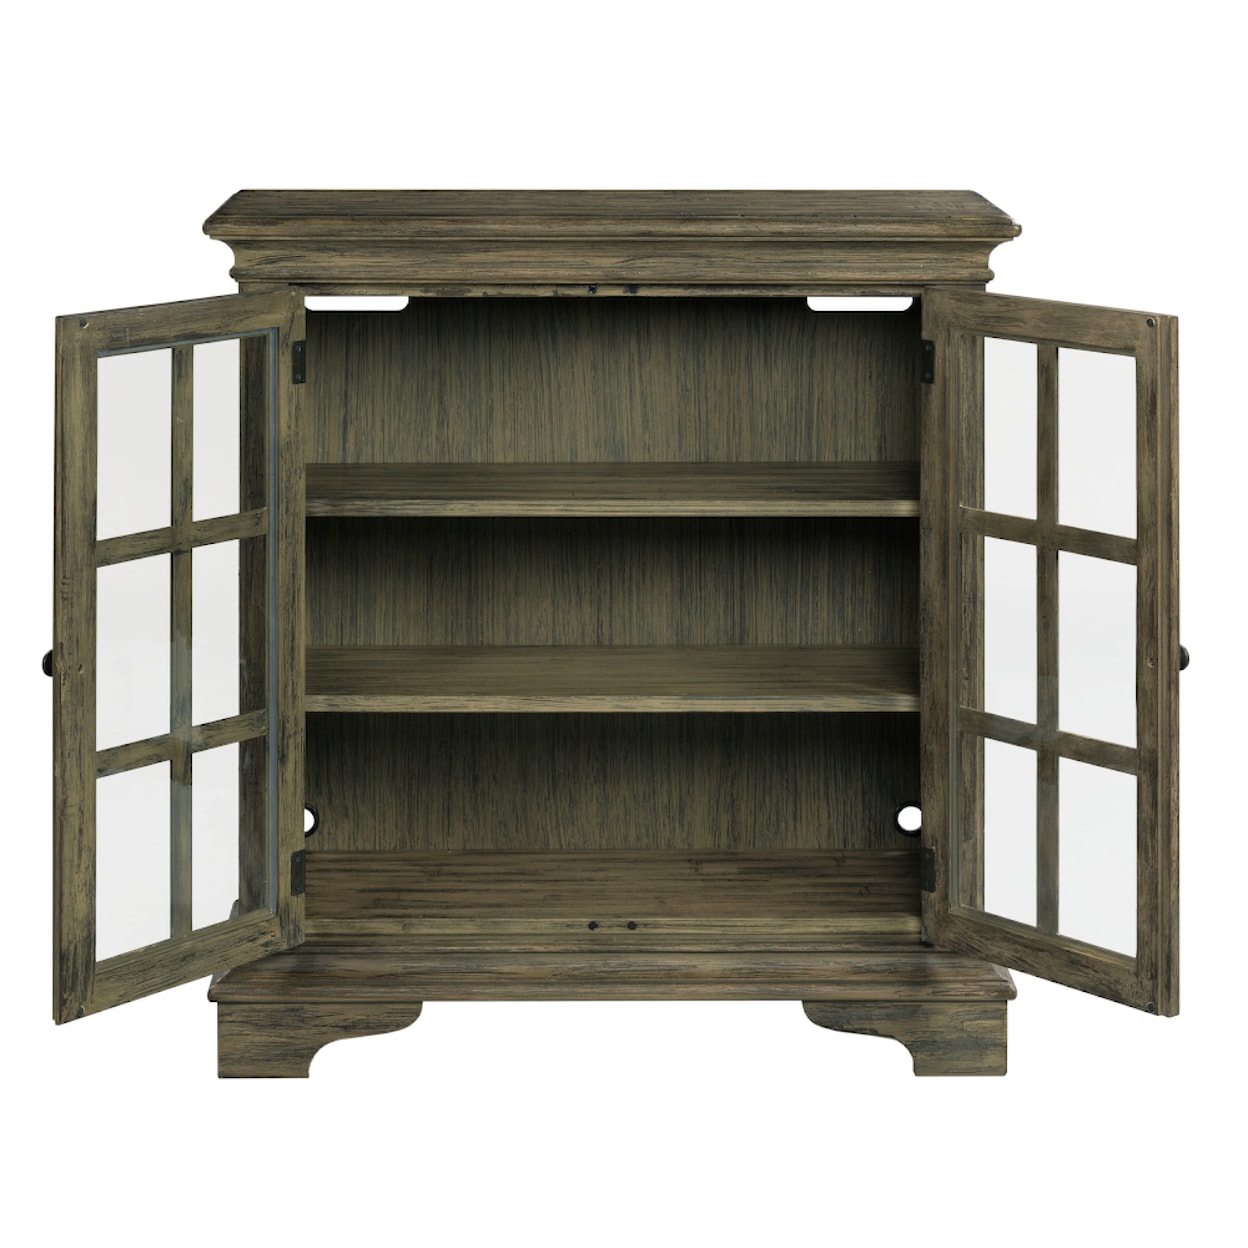 Kincaid Furniture Acquisitions Oliver Two Door Console